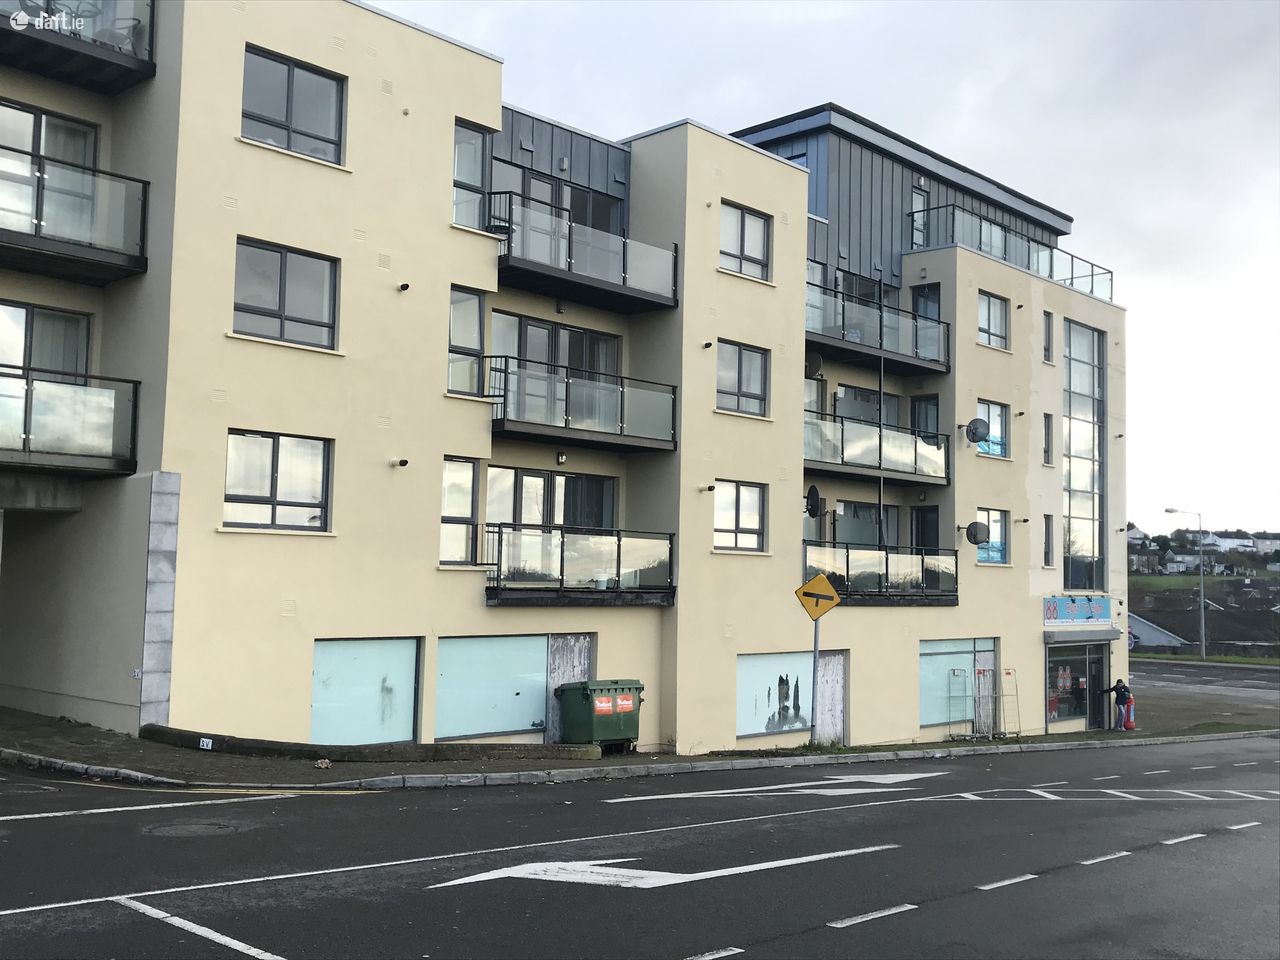 Units 1,2 & 3, Mount Suir Manor, Gracedieu, Waterford City, Co. Waterford